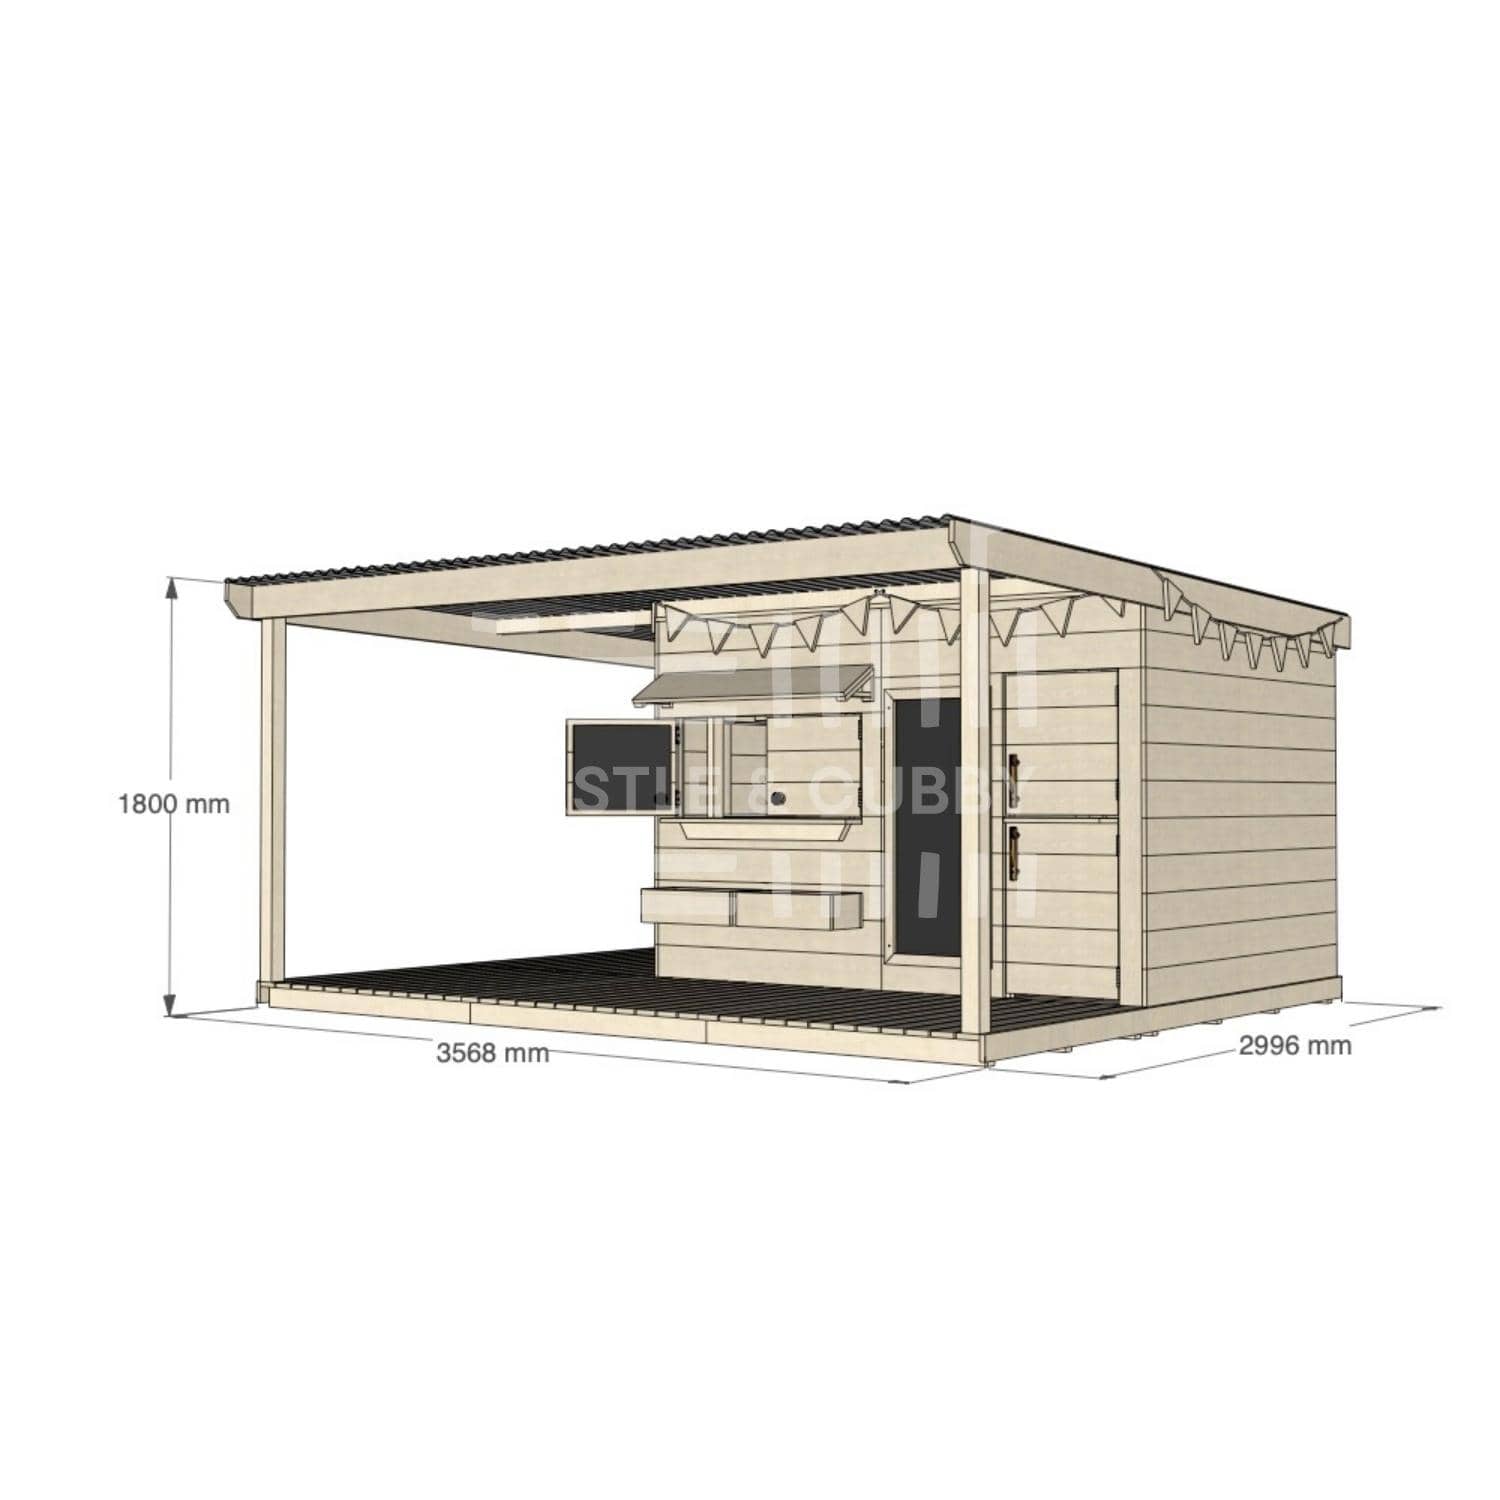 Raw pine cubby house with wraparound verandah for residential backyards large rectangle size with dimensions